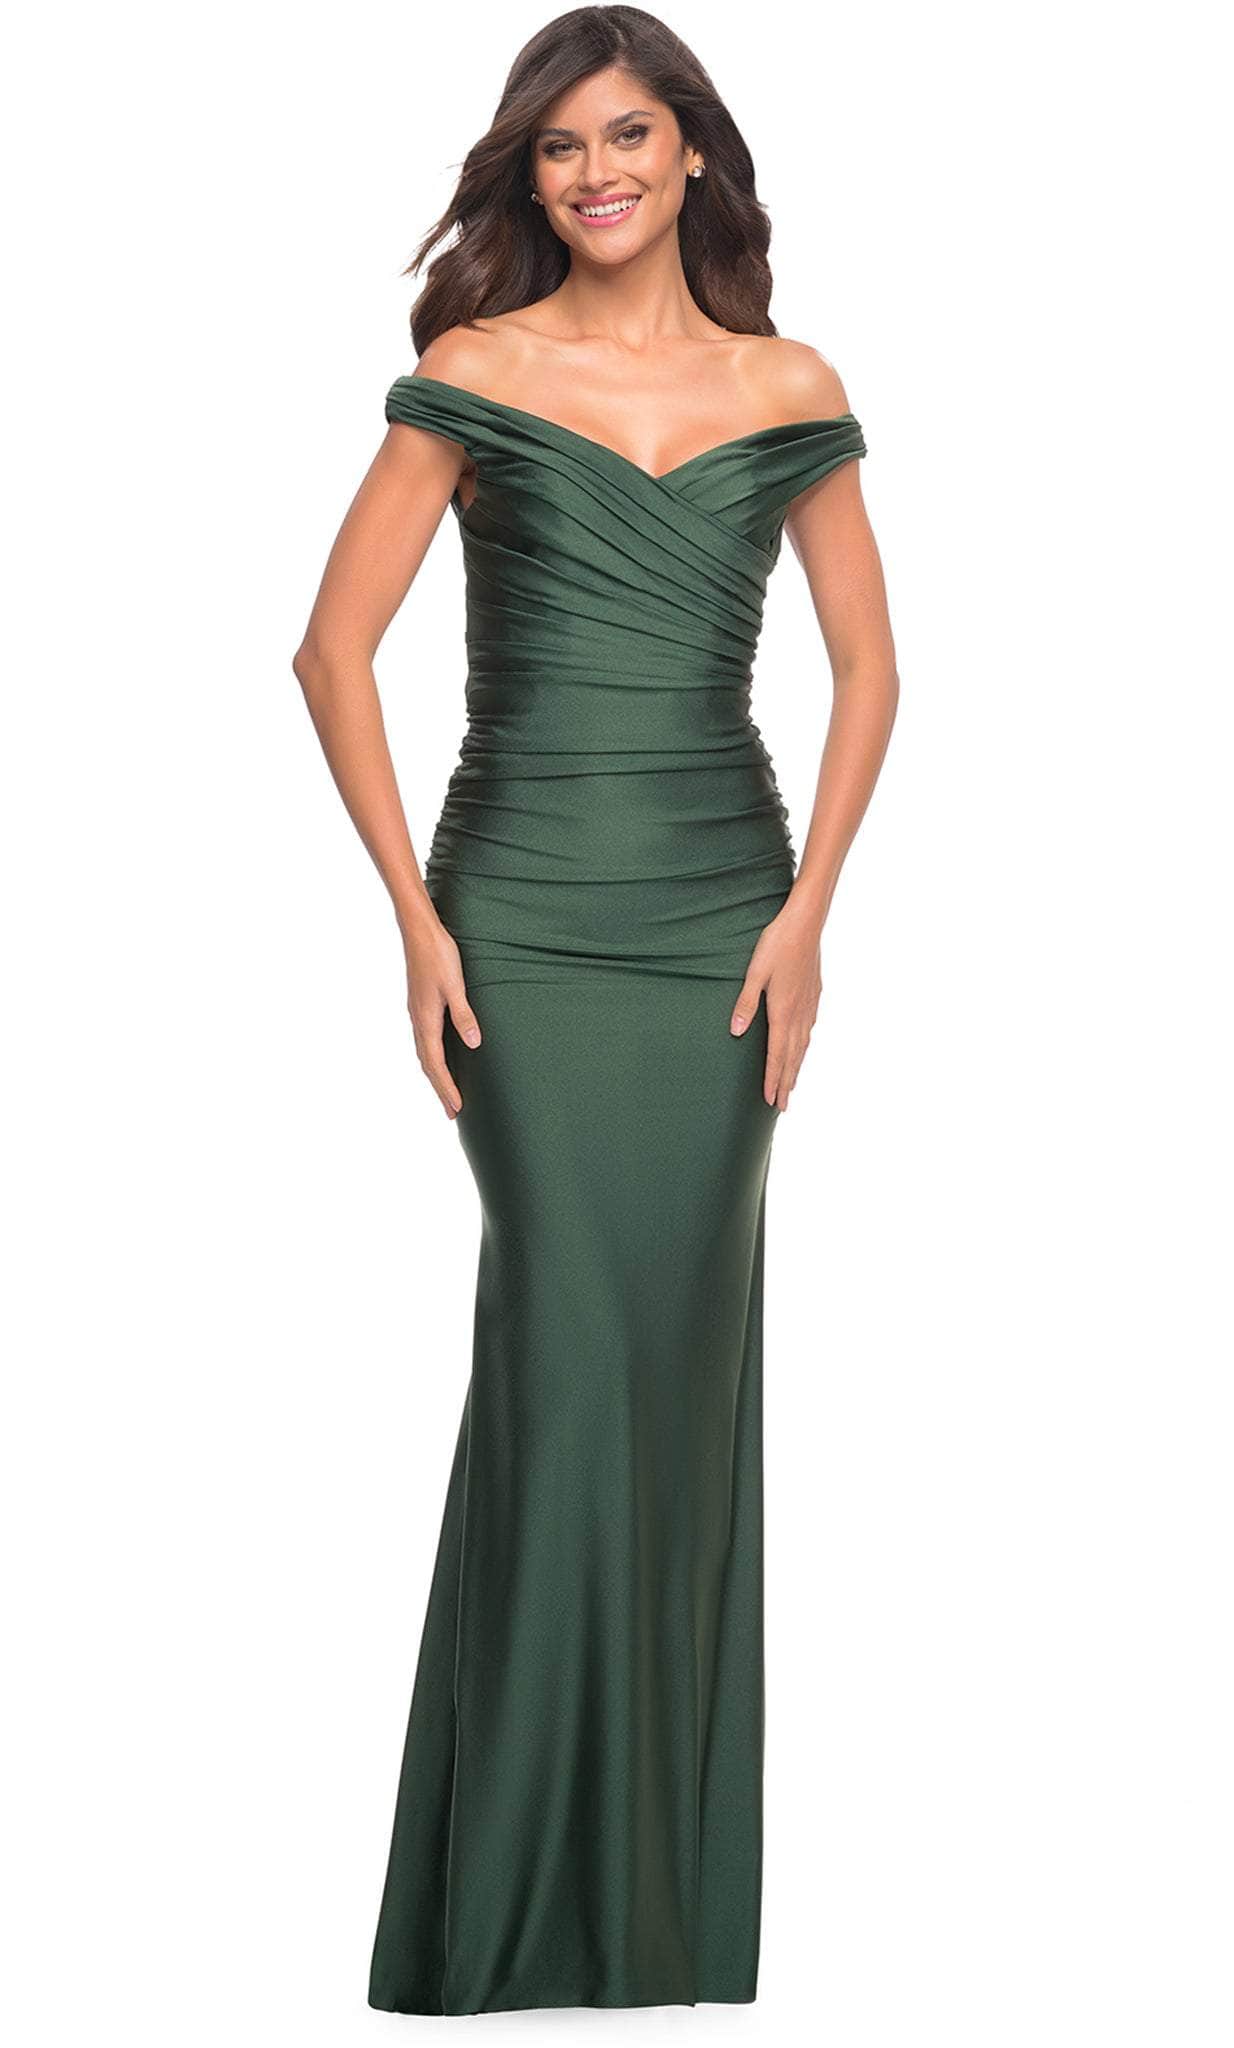 La Femme 30631 - Off Shoulder Fitted Long Gown Special Occasion Dress 00 / Dark Emerald